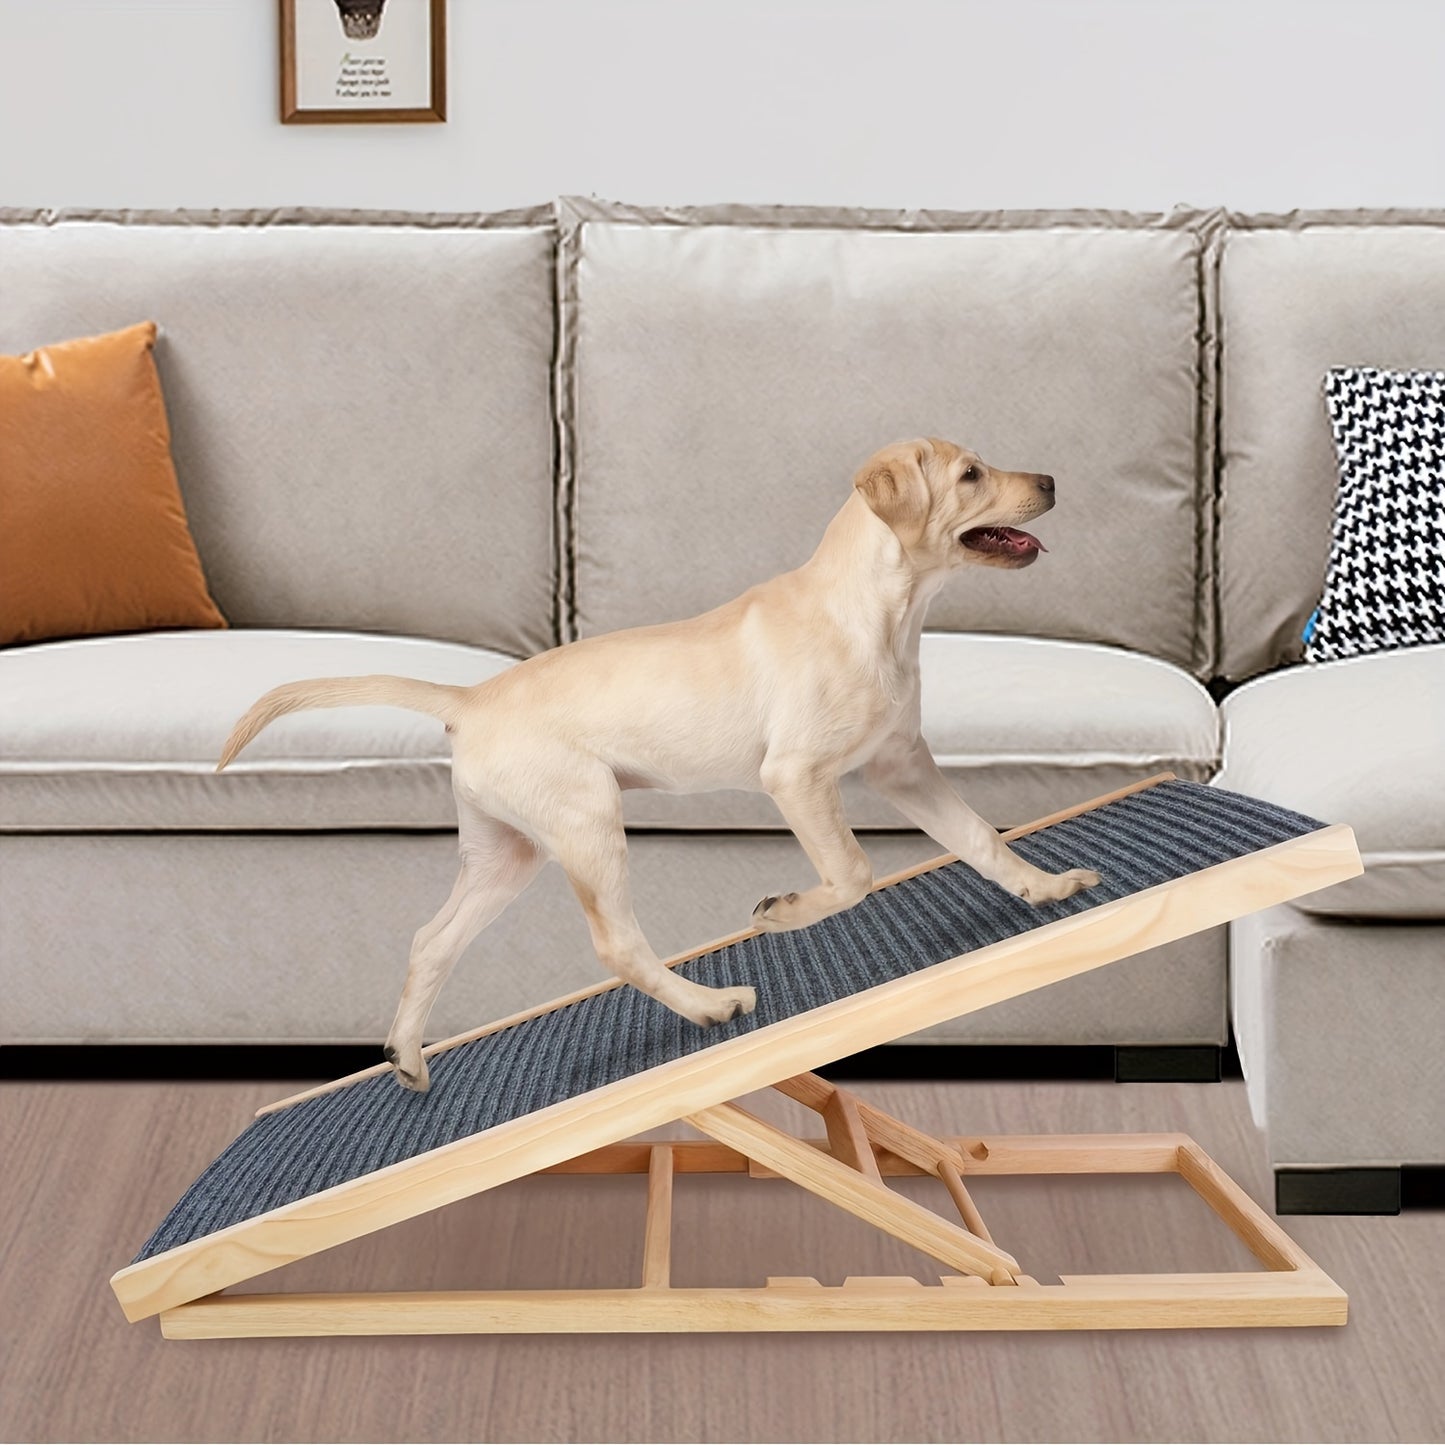 Adjustable Wooden Pet Staircase, With Different Heights And Slopes For Dogs For Getting On The Sofa, And Getting On The Bed